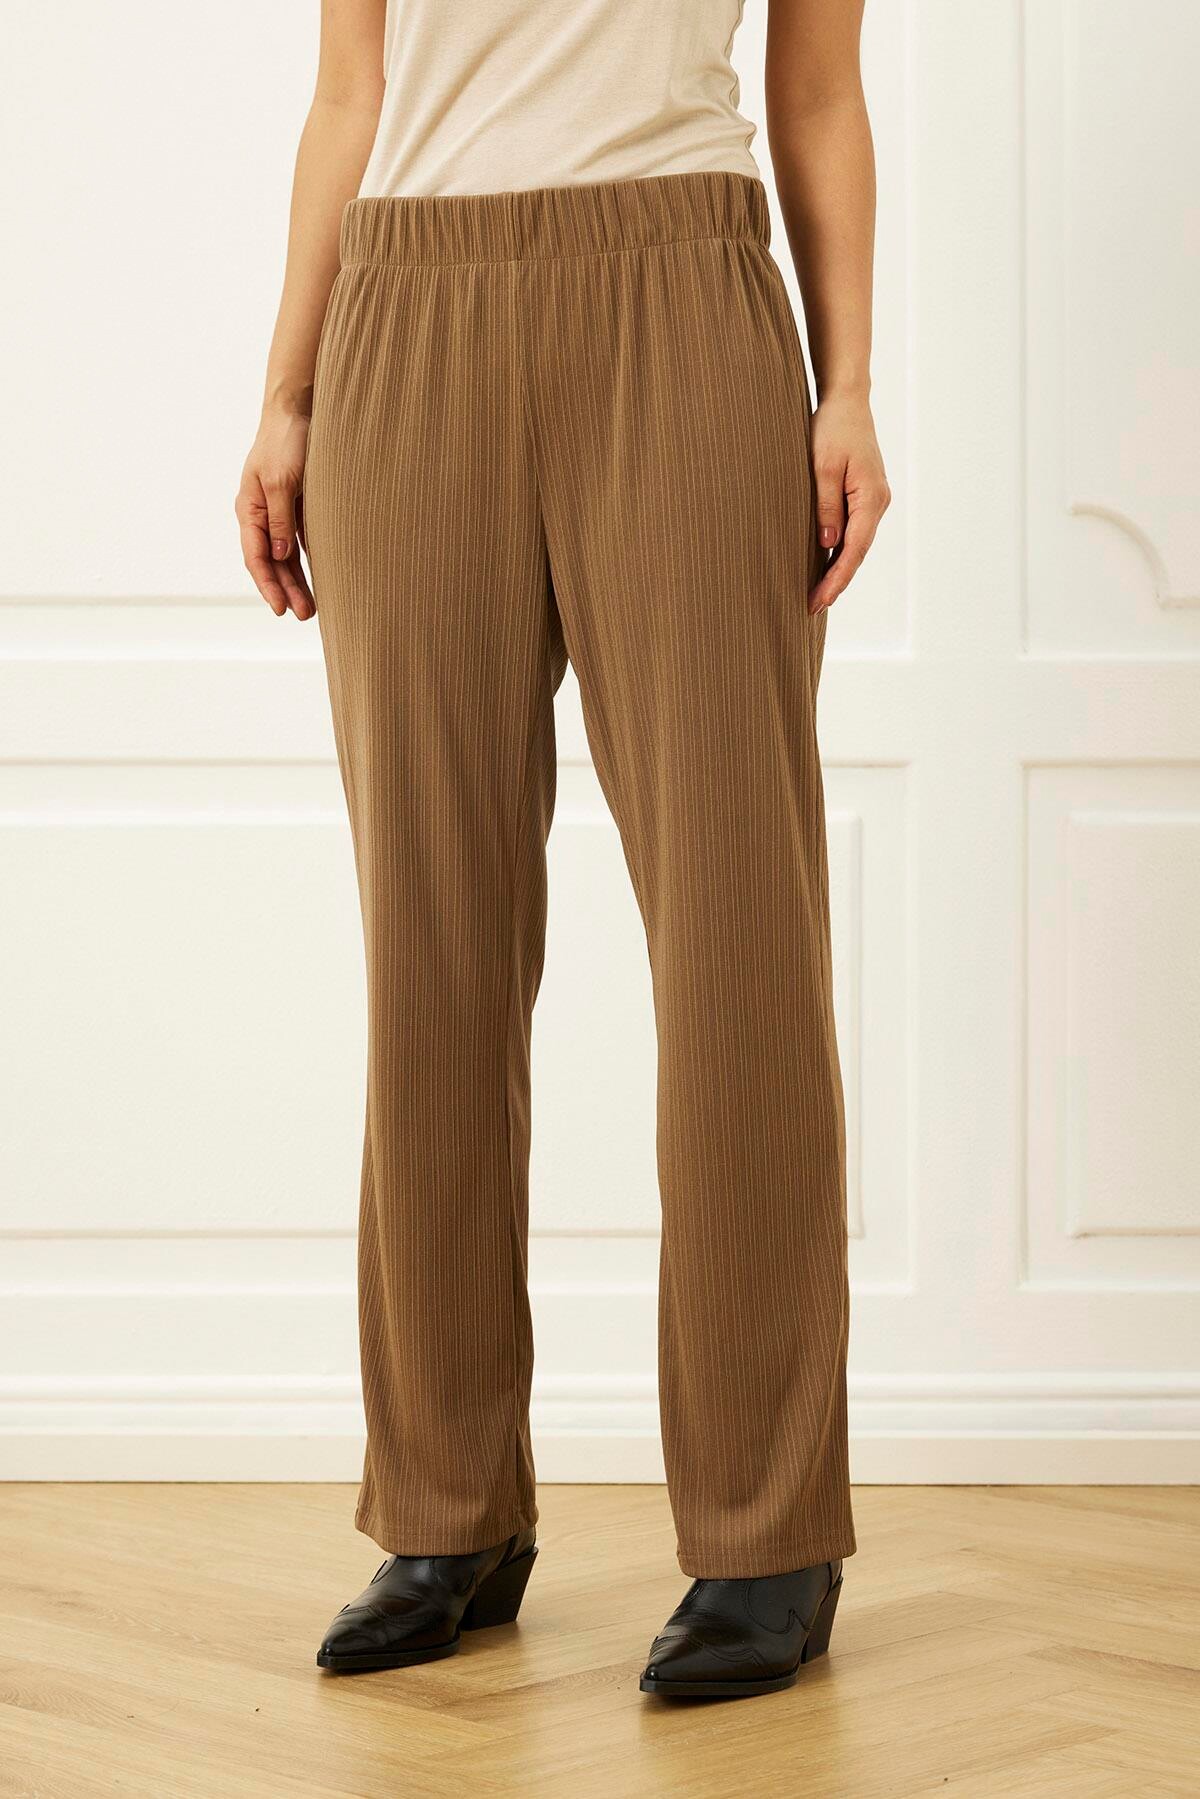 IN FRONT GEMMA PANTS 16050 801 (Brown 801)